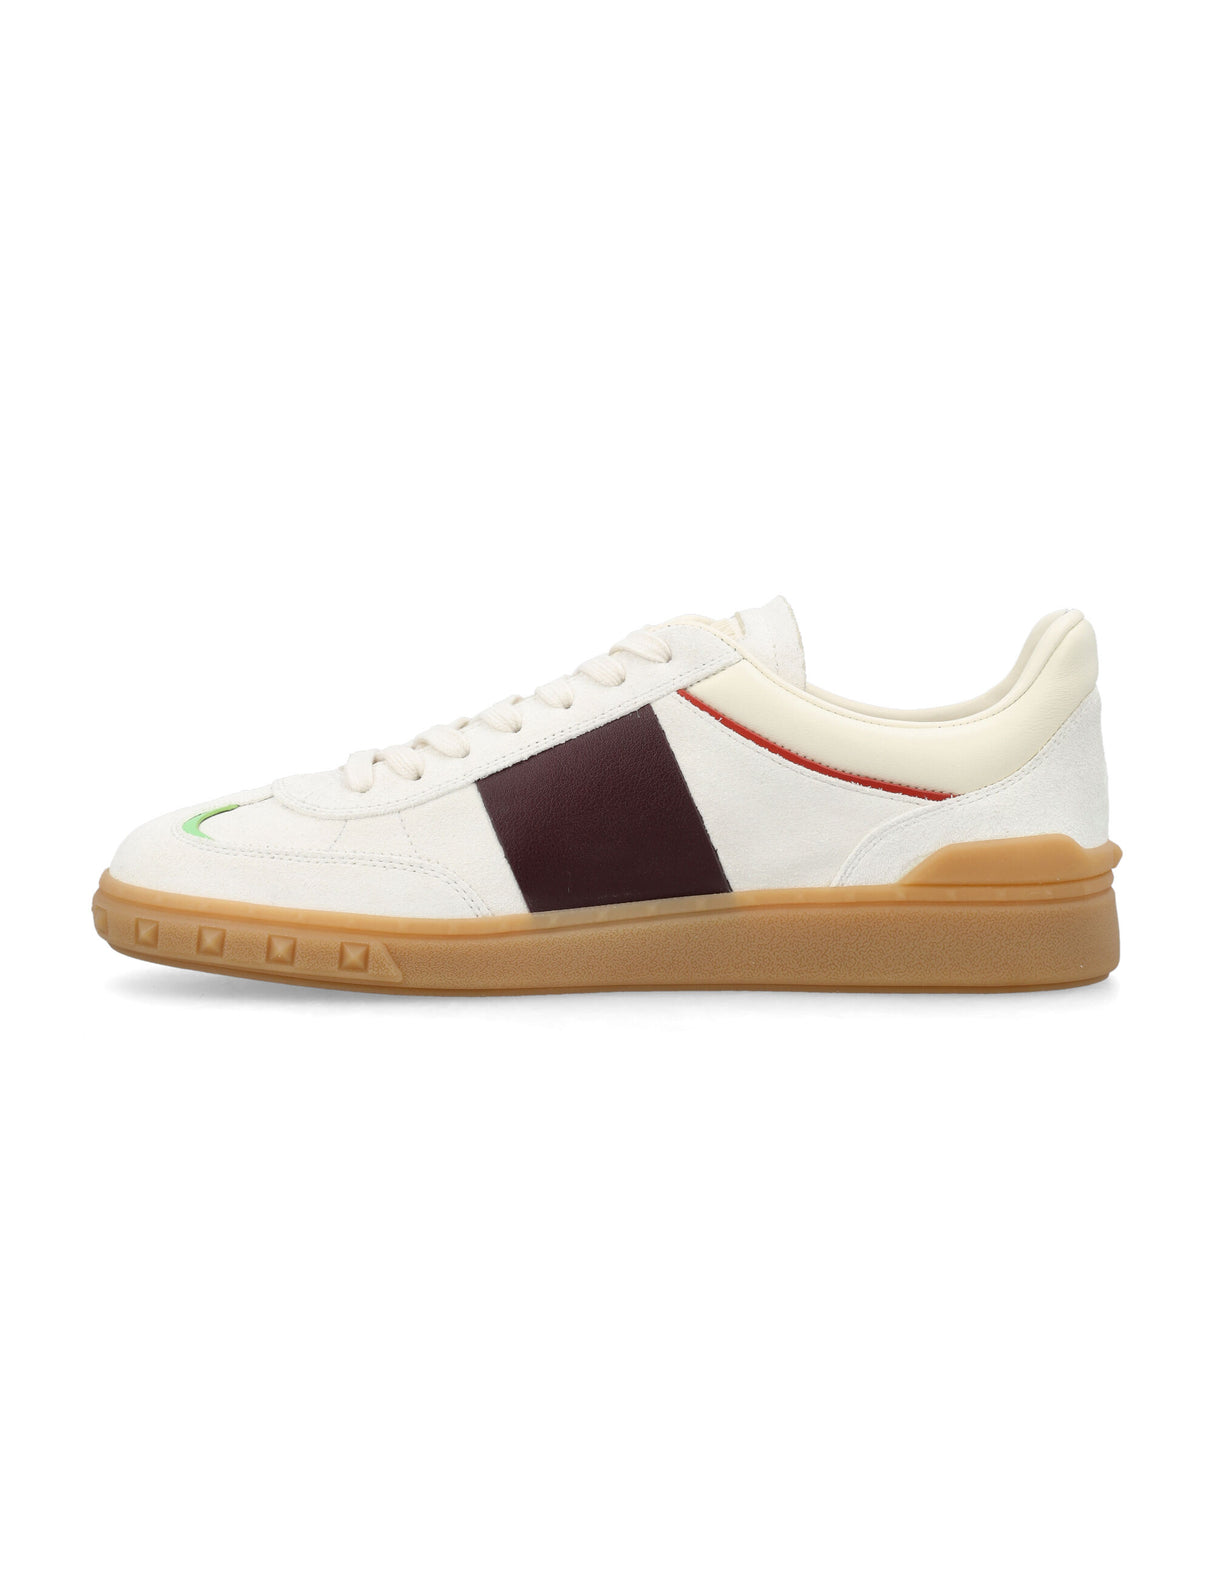 VALENTINO GARAVANI Ivory Leather Low Top Sneakers for Men